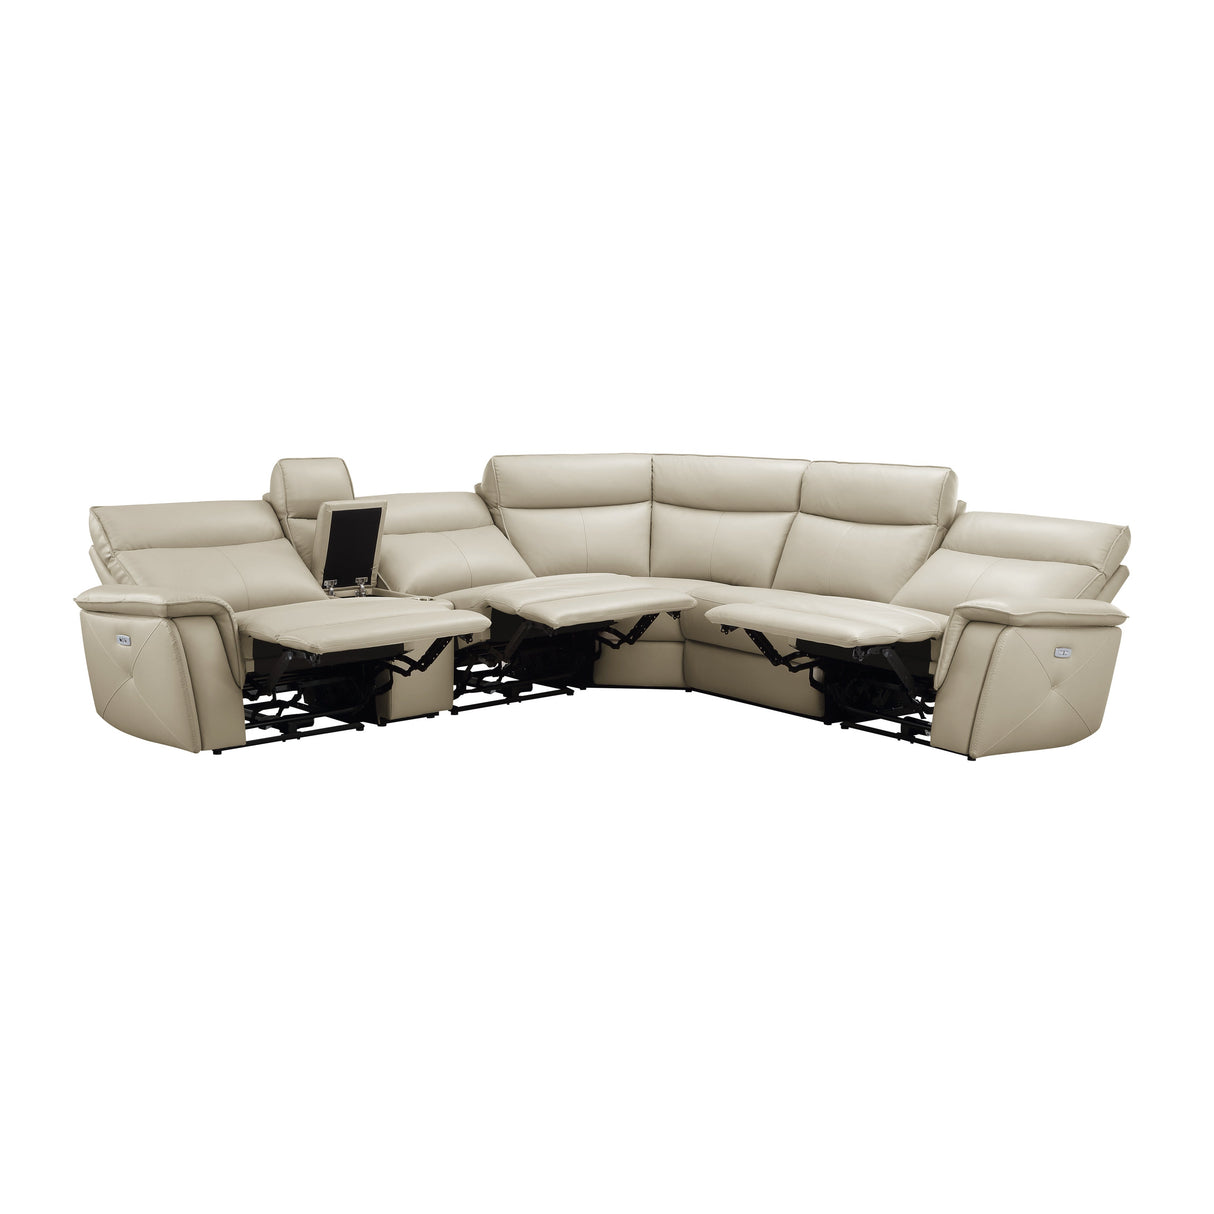 Maroni Taupe Leather 6-Piece Modular Power Reclining Sectional